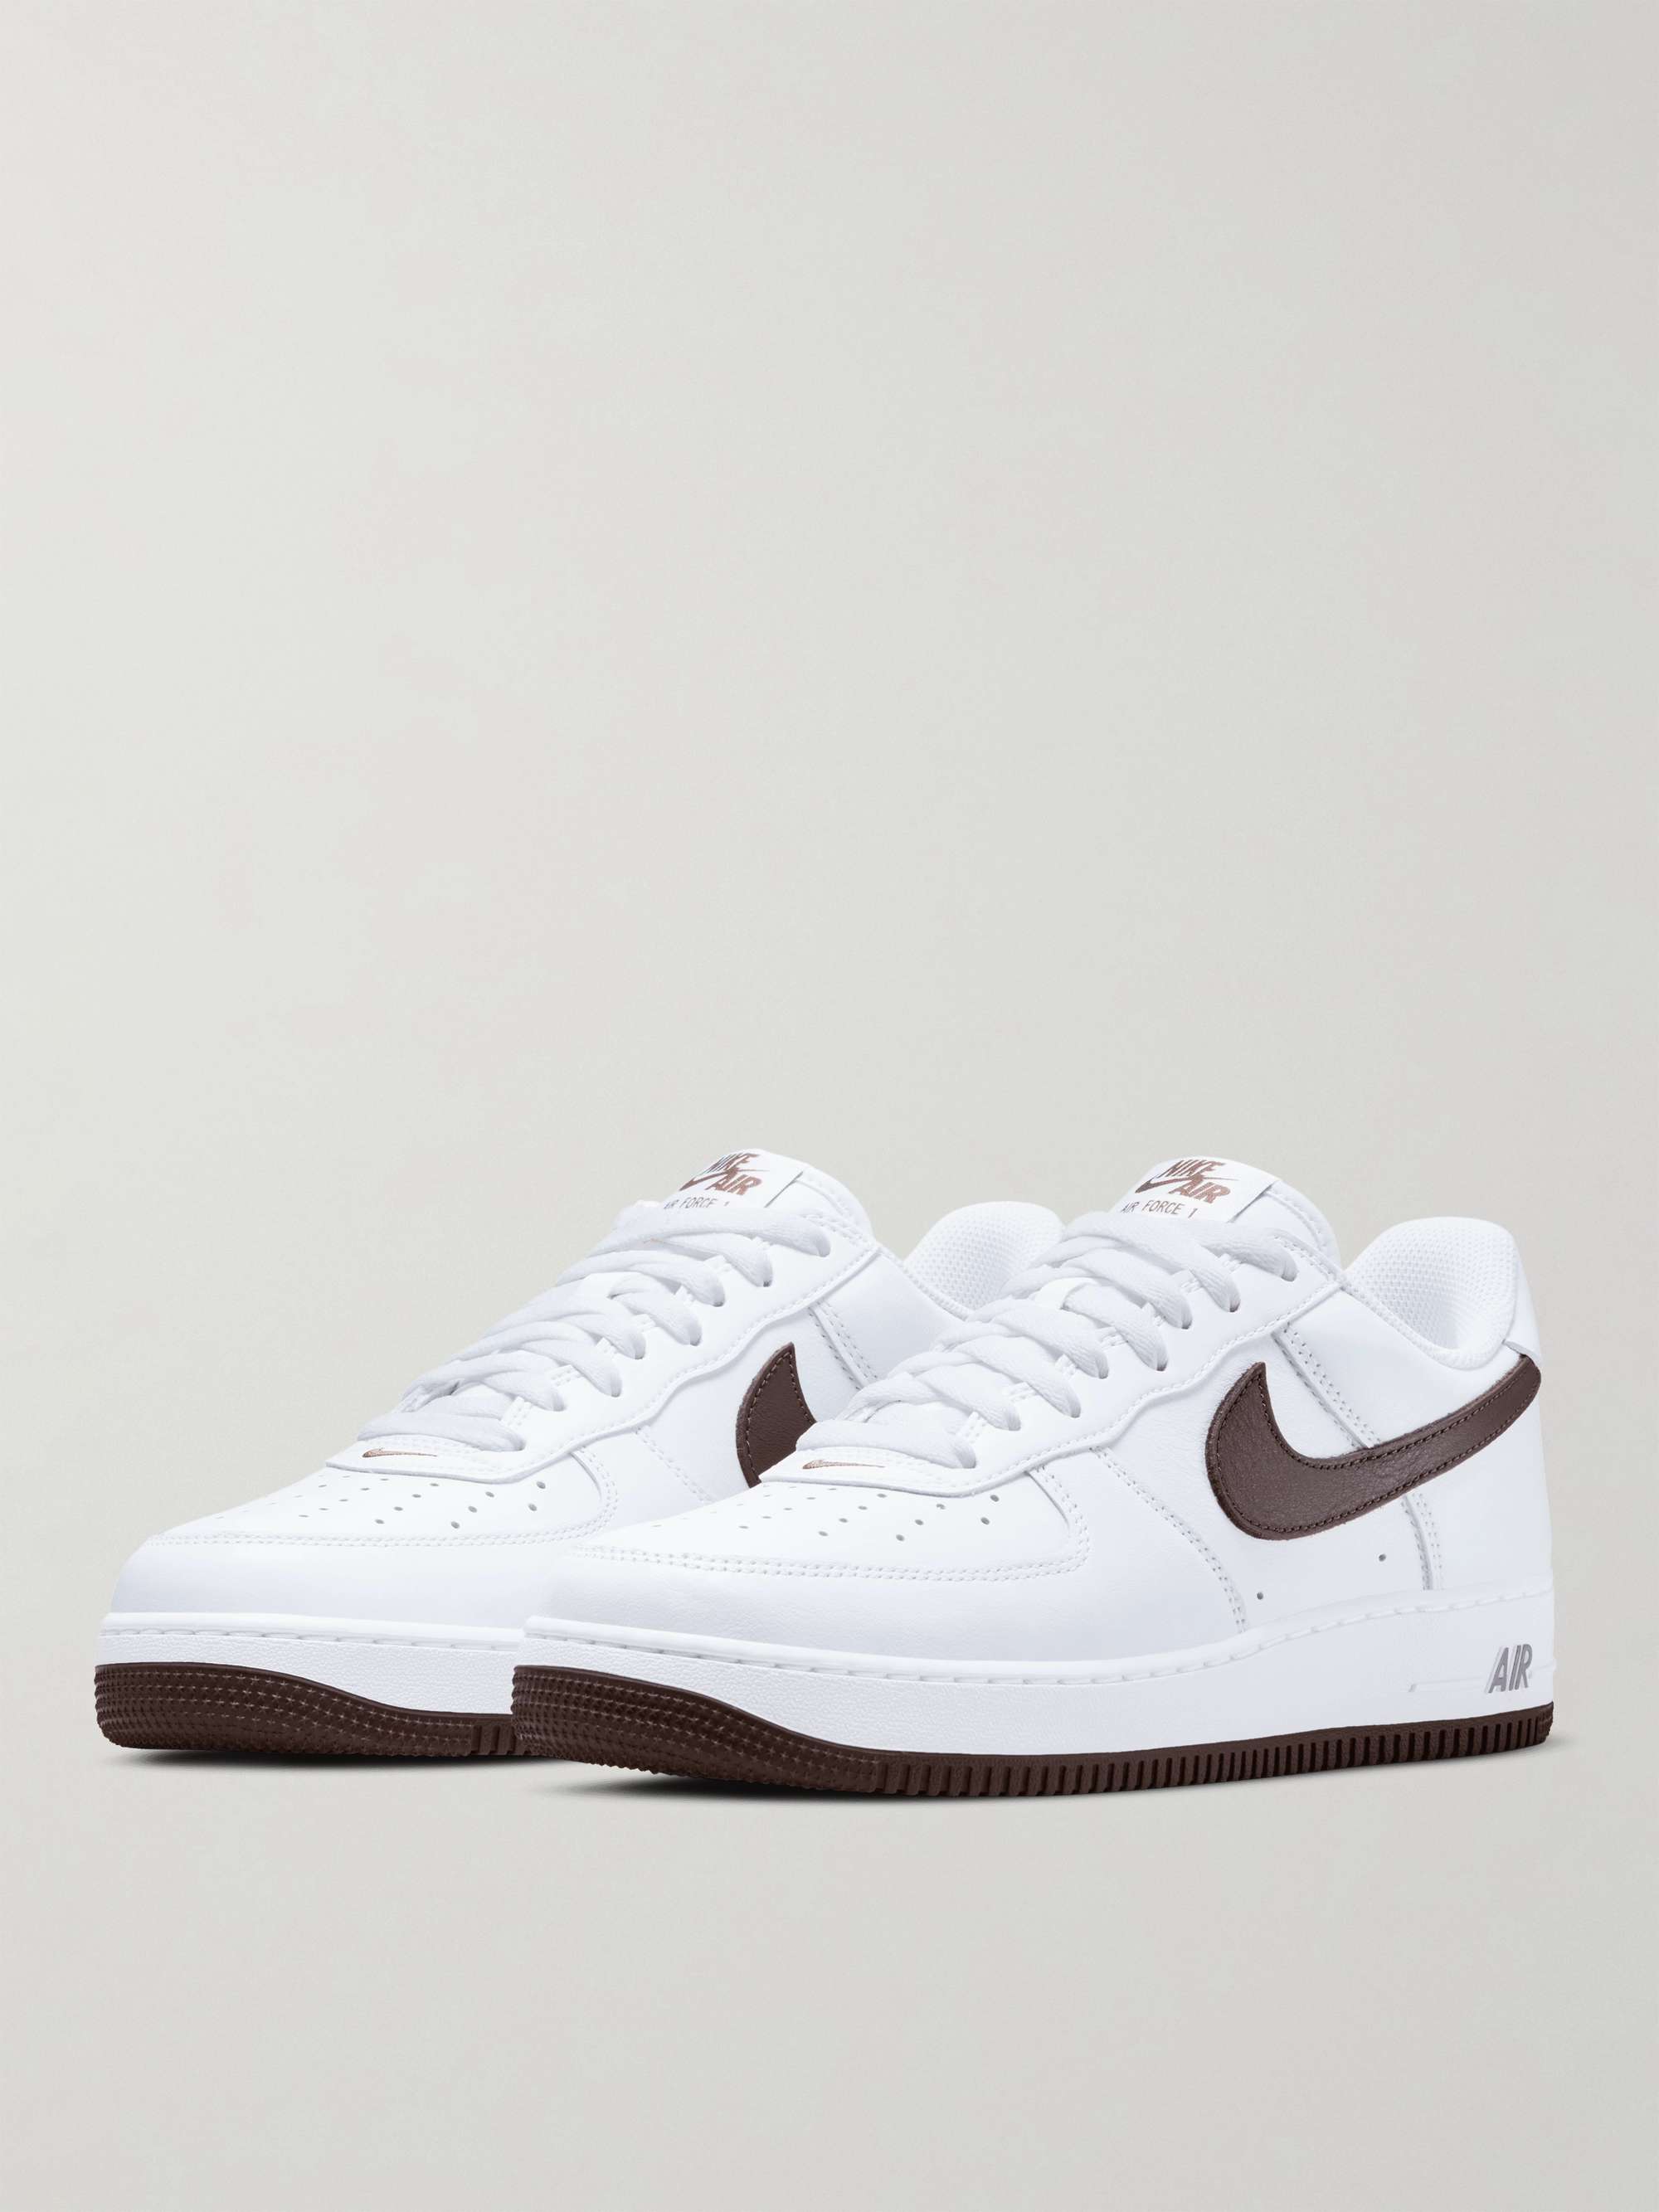 NIKE Air Force 1 Low Retro Leather Sneakers